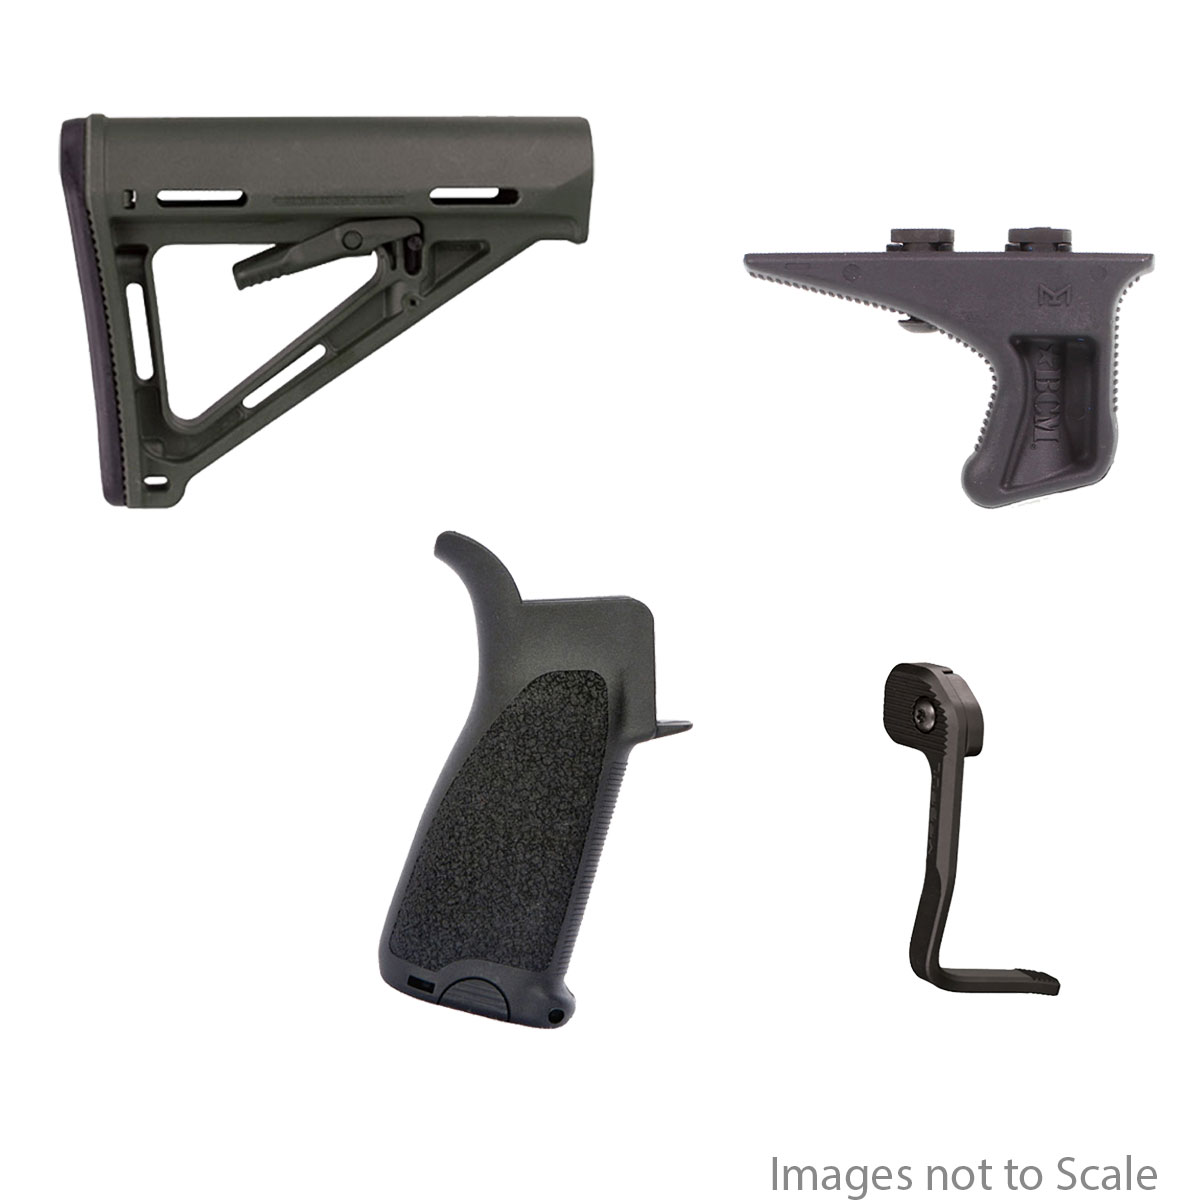 Furniture Kit: Magpul MOE Mil-Spec Collapsible AR-15 Carbine Synthetic Buttstock + BCM Gunfighter Black Mod 3 Grip + Magpul BAD Lever Extended Bolt Catch + BCM Kinesthetic Angled Grip